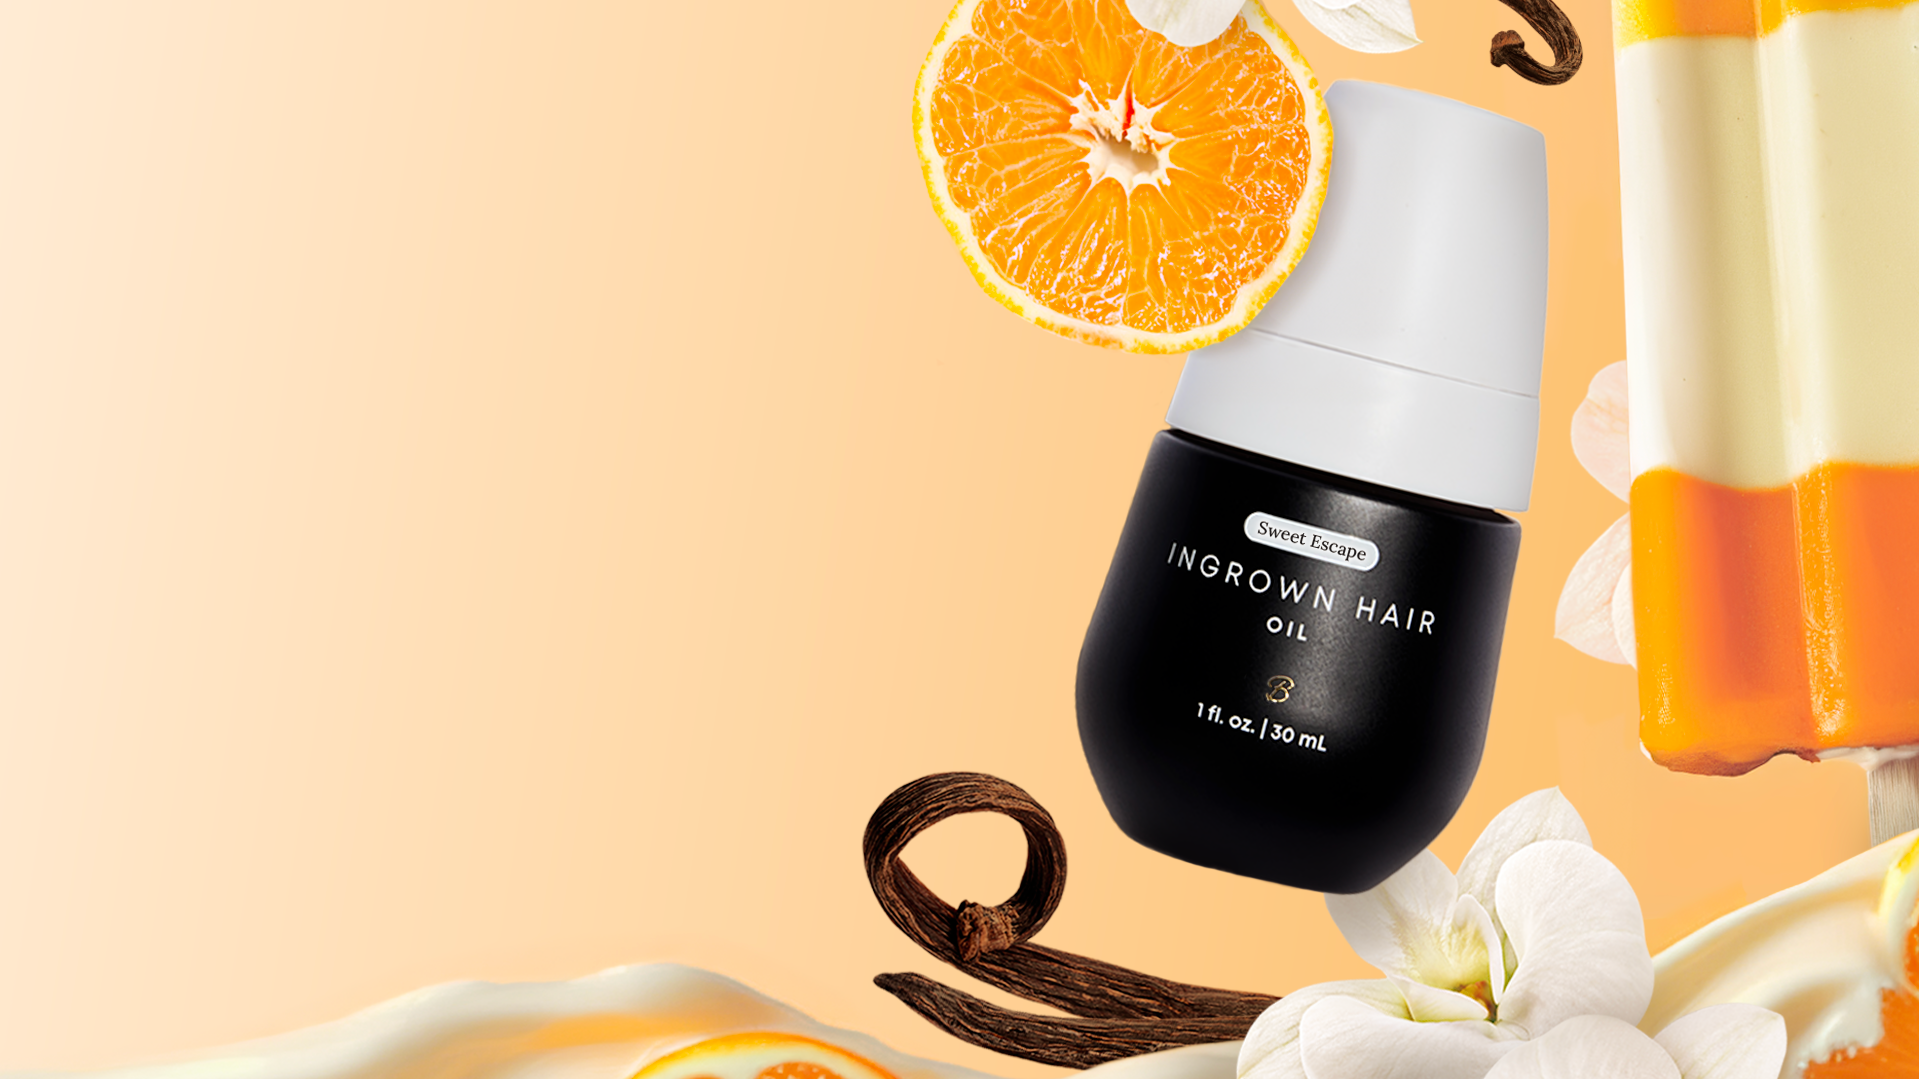 A bottle of ingrown hair oil surrounded by citrus, vanilla, and a creamsicle.